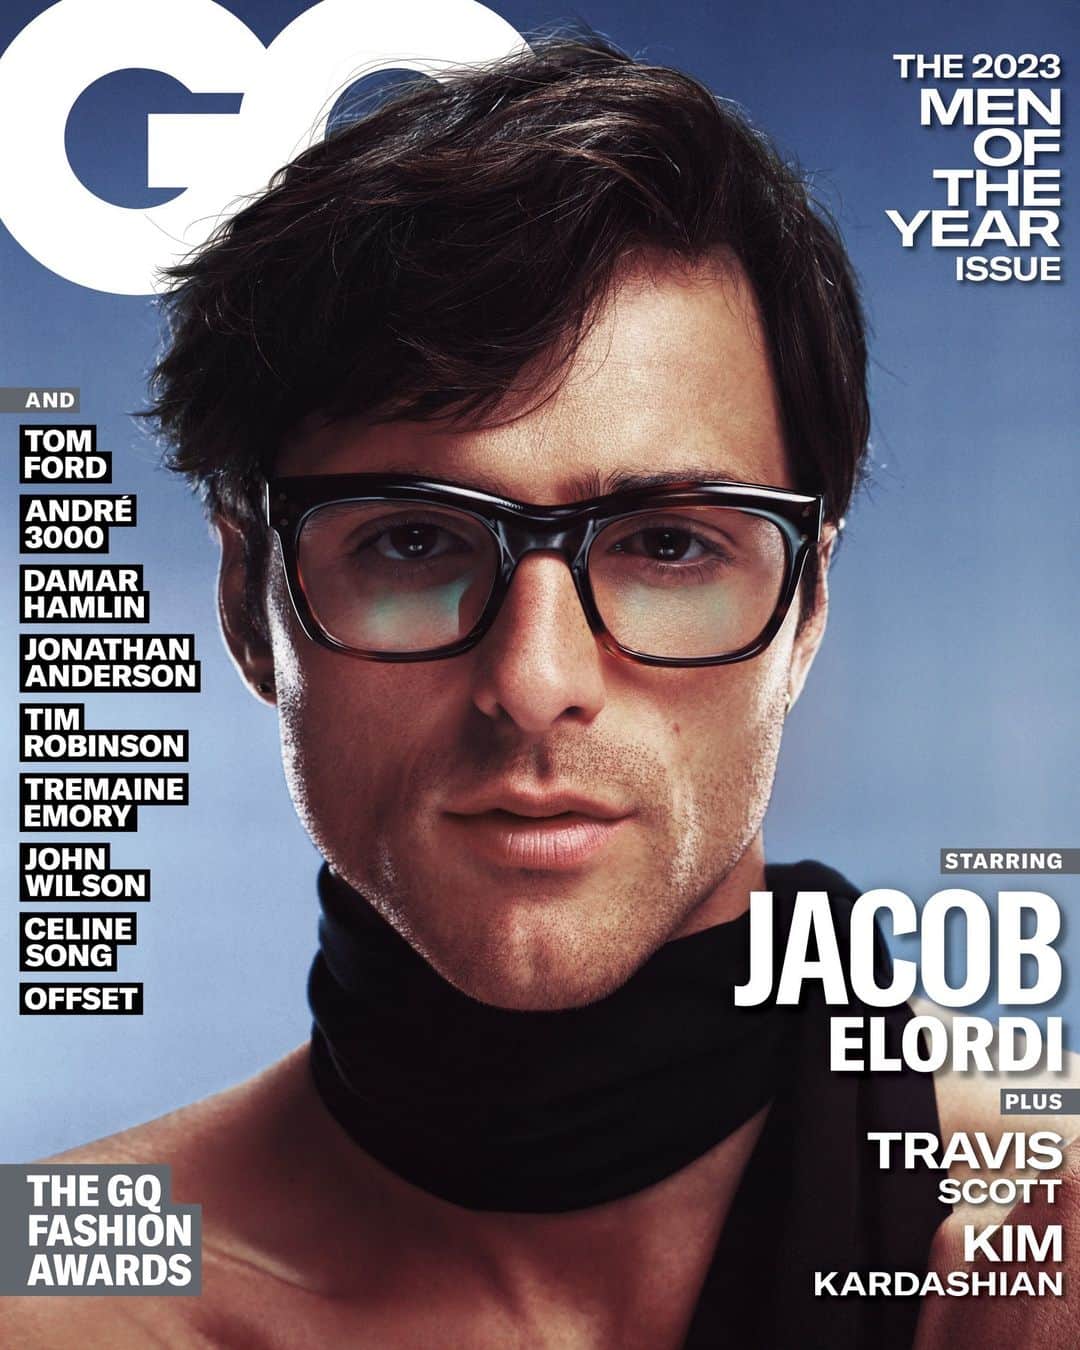 GQのインスタグラム：「Presenting our first #GQMOTY cover star: Jacob Elordi.  He’s one of Australia’s biggest cultural exports. And now, with a breakout movie role as an effortlessly toxic Elvis in Sofia Coppola’s @priscillamovie, and a posh aristocrat with an eyebrow piercing in Emerald Fennell's @saltburnfilm, @jacobelordi is entering a new elite strata of actors.   For GQ’s Men of the Year issue, Elordi gets candid about portraying the King, rejecting a Superman audition, and the practical reason why he always carries a gorgeous designer handbag.  Written by @gabriellapaiella Photographer @jack_bridgland_studio Styled by @georgecortina Hair by @hairbyorlandopita using Orlando Pita Play Skin by @markcarrasquillo for La Mer Set Design by @stefanbeckman at Exposure NY」